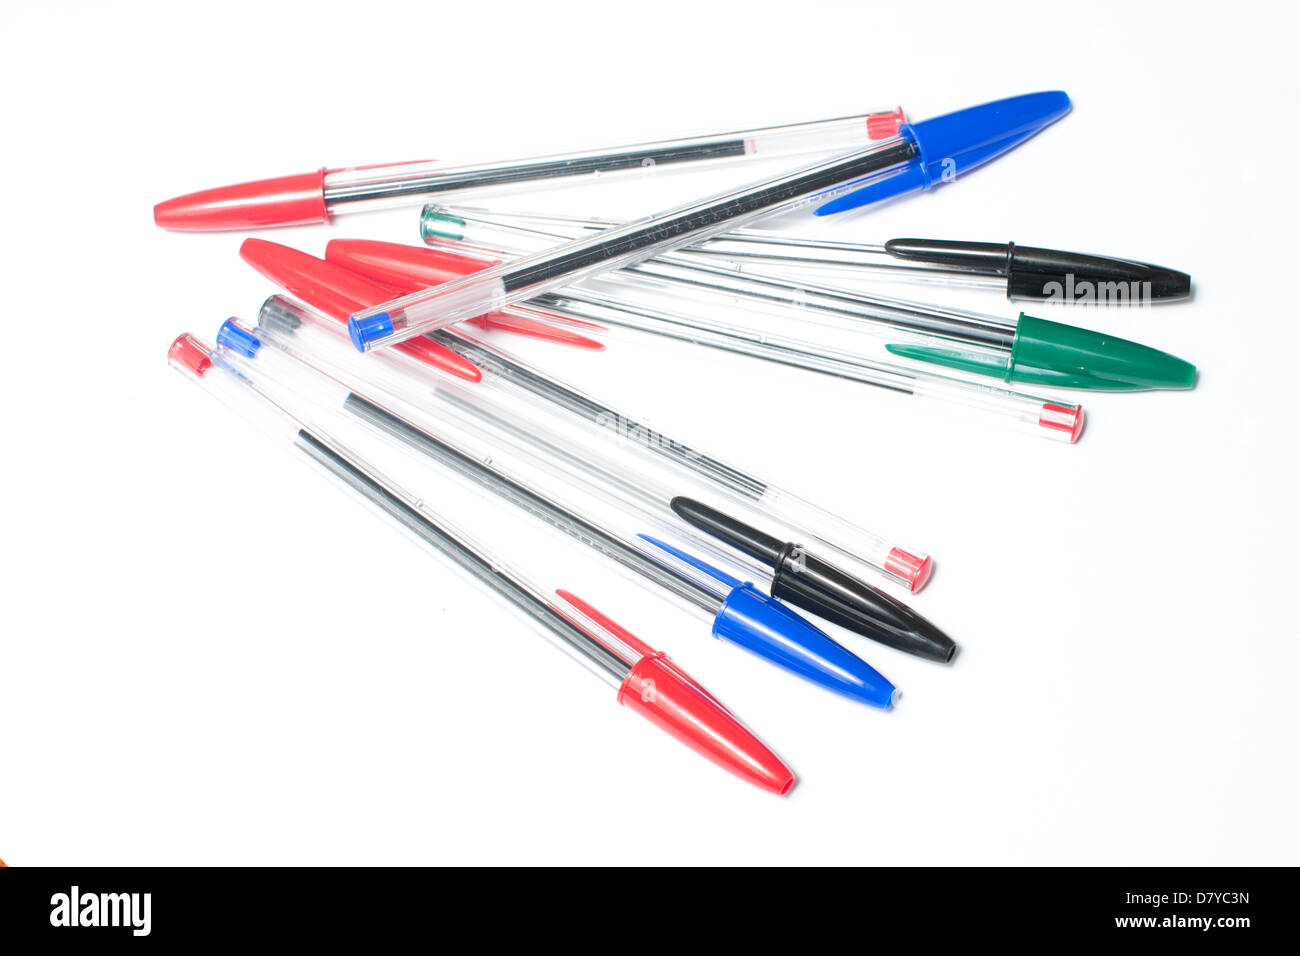 A collection of green, red, black and blue biro pens Stock Photo